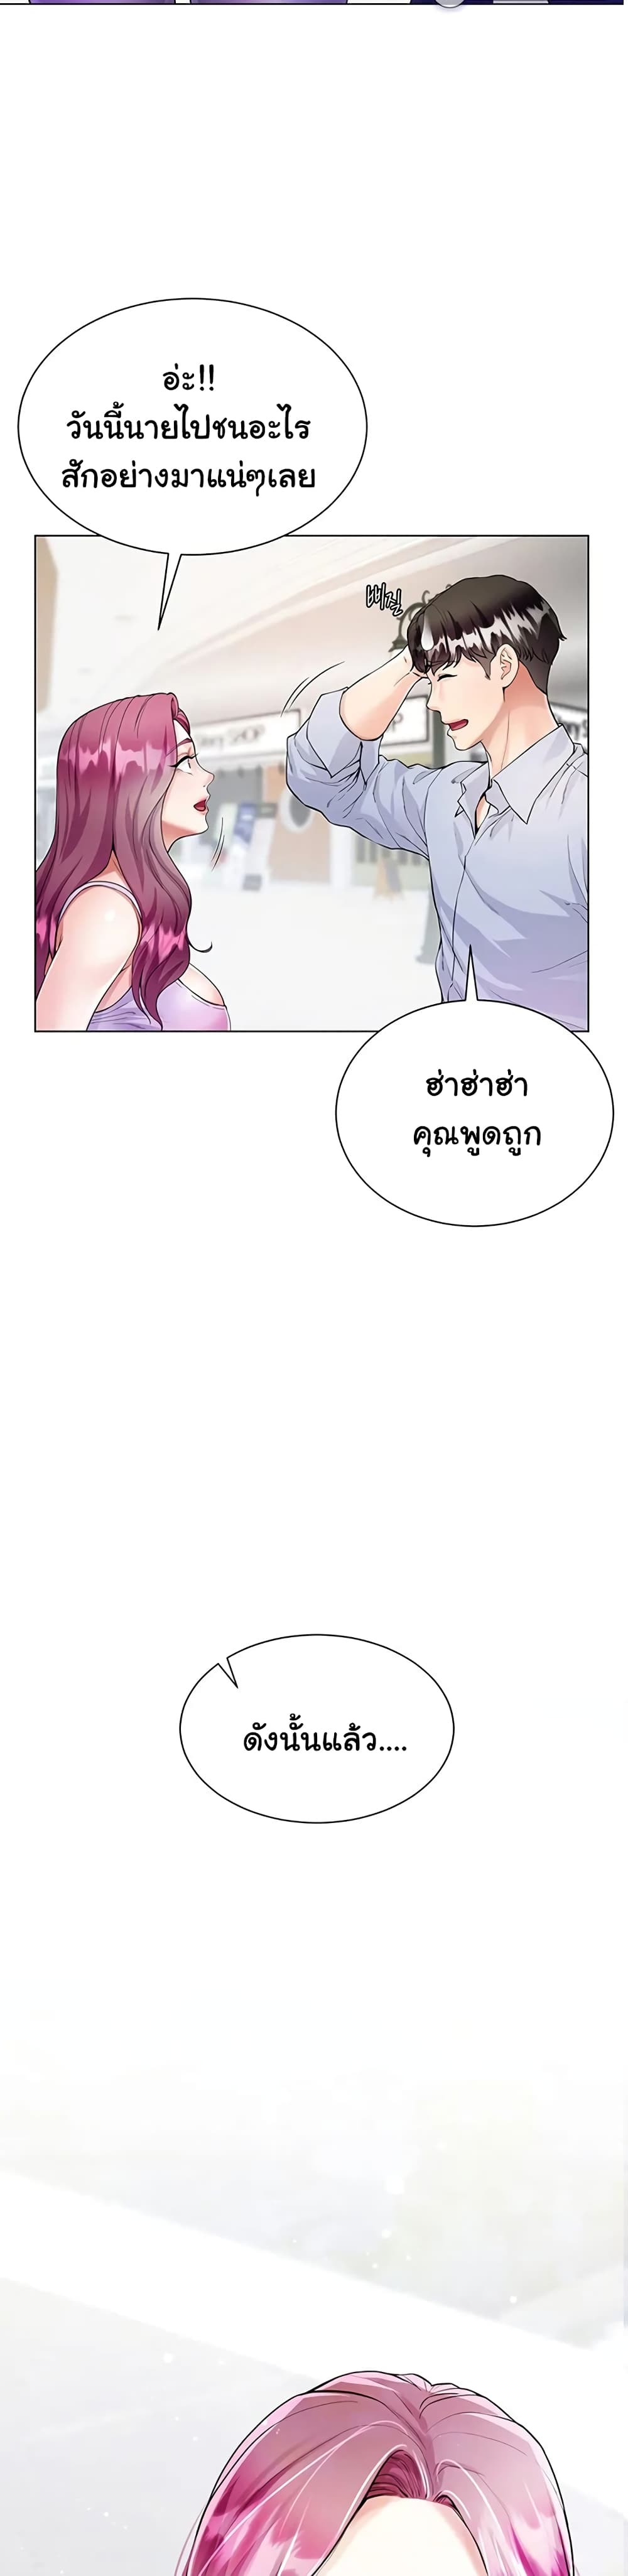 Sister-in-Law’s Skirt ตอนที่ 3 ภาพ 2